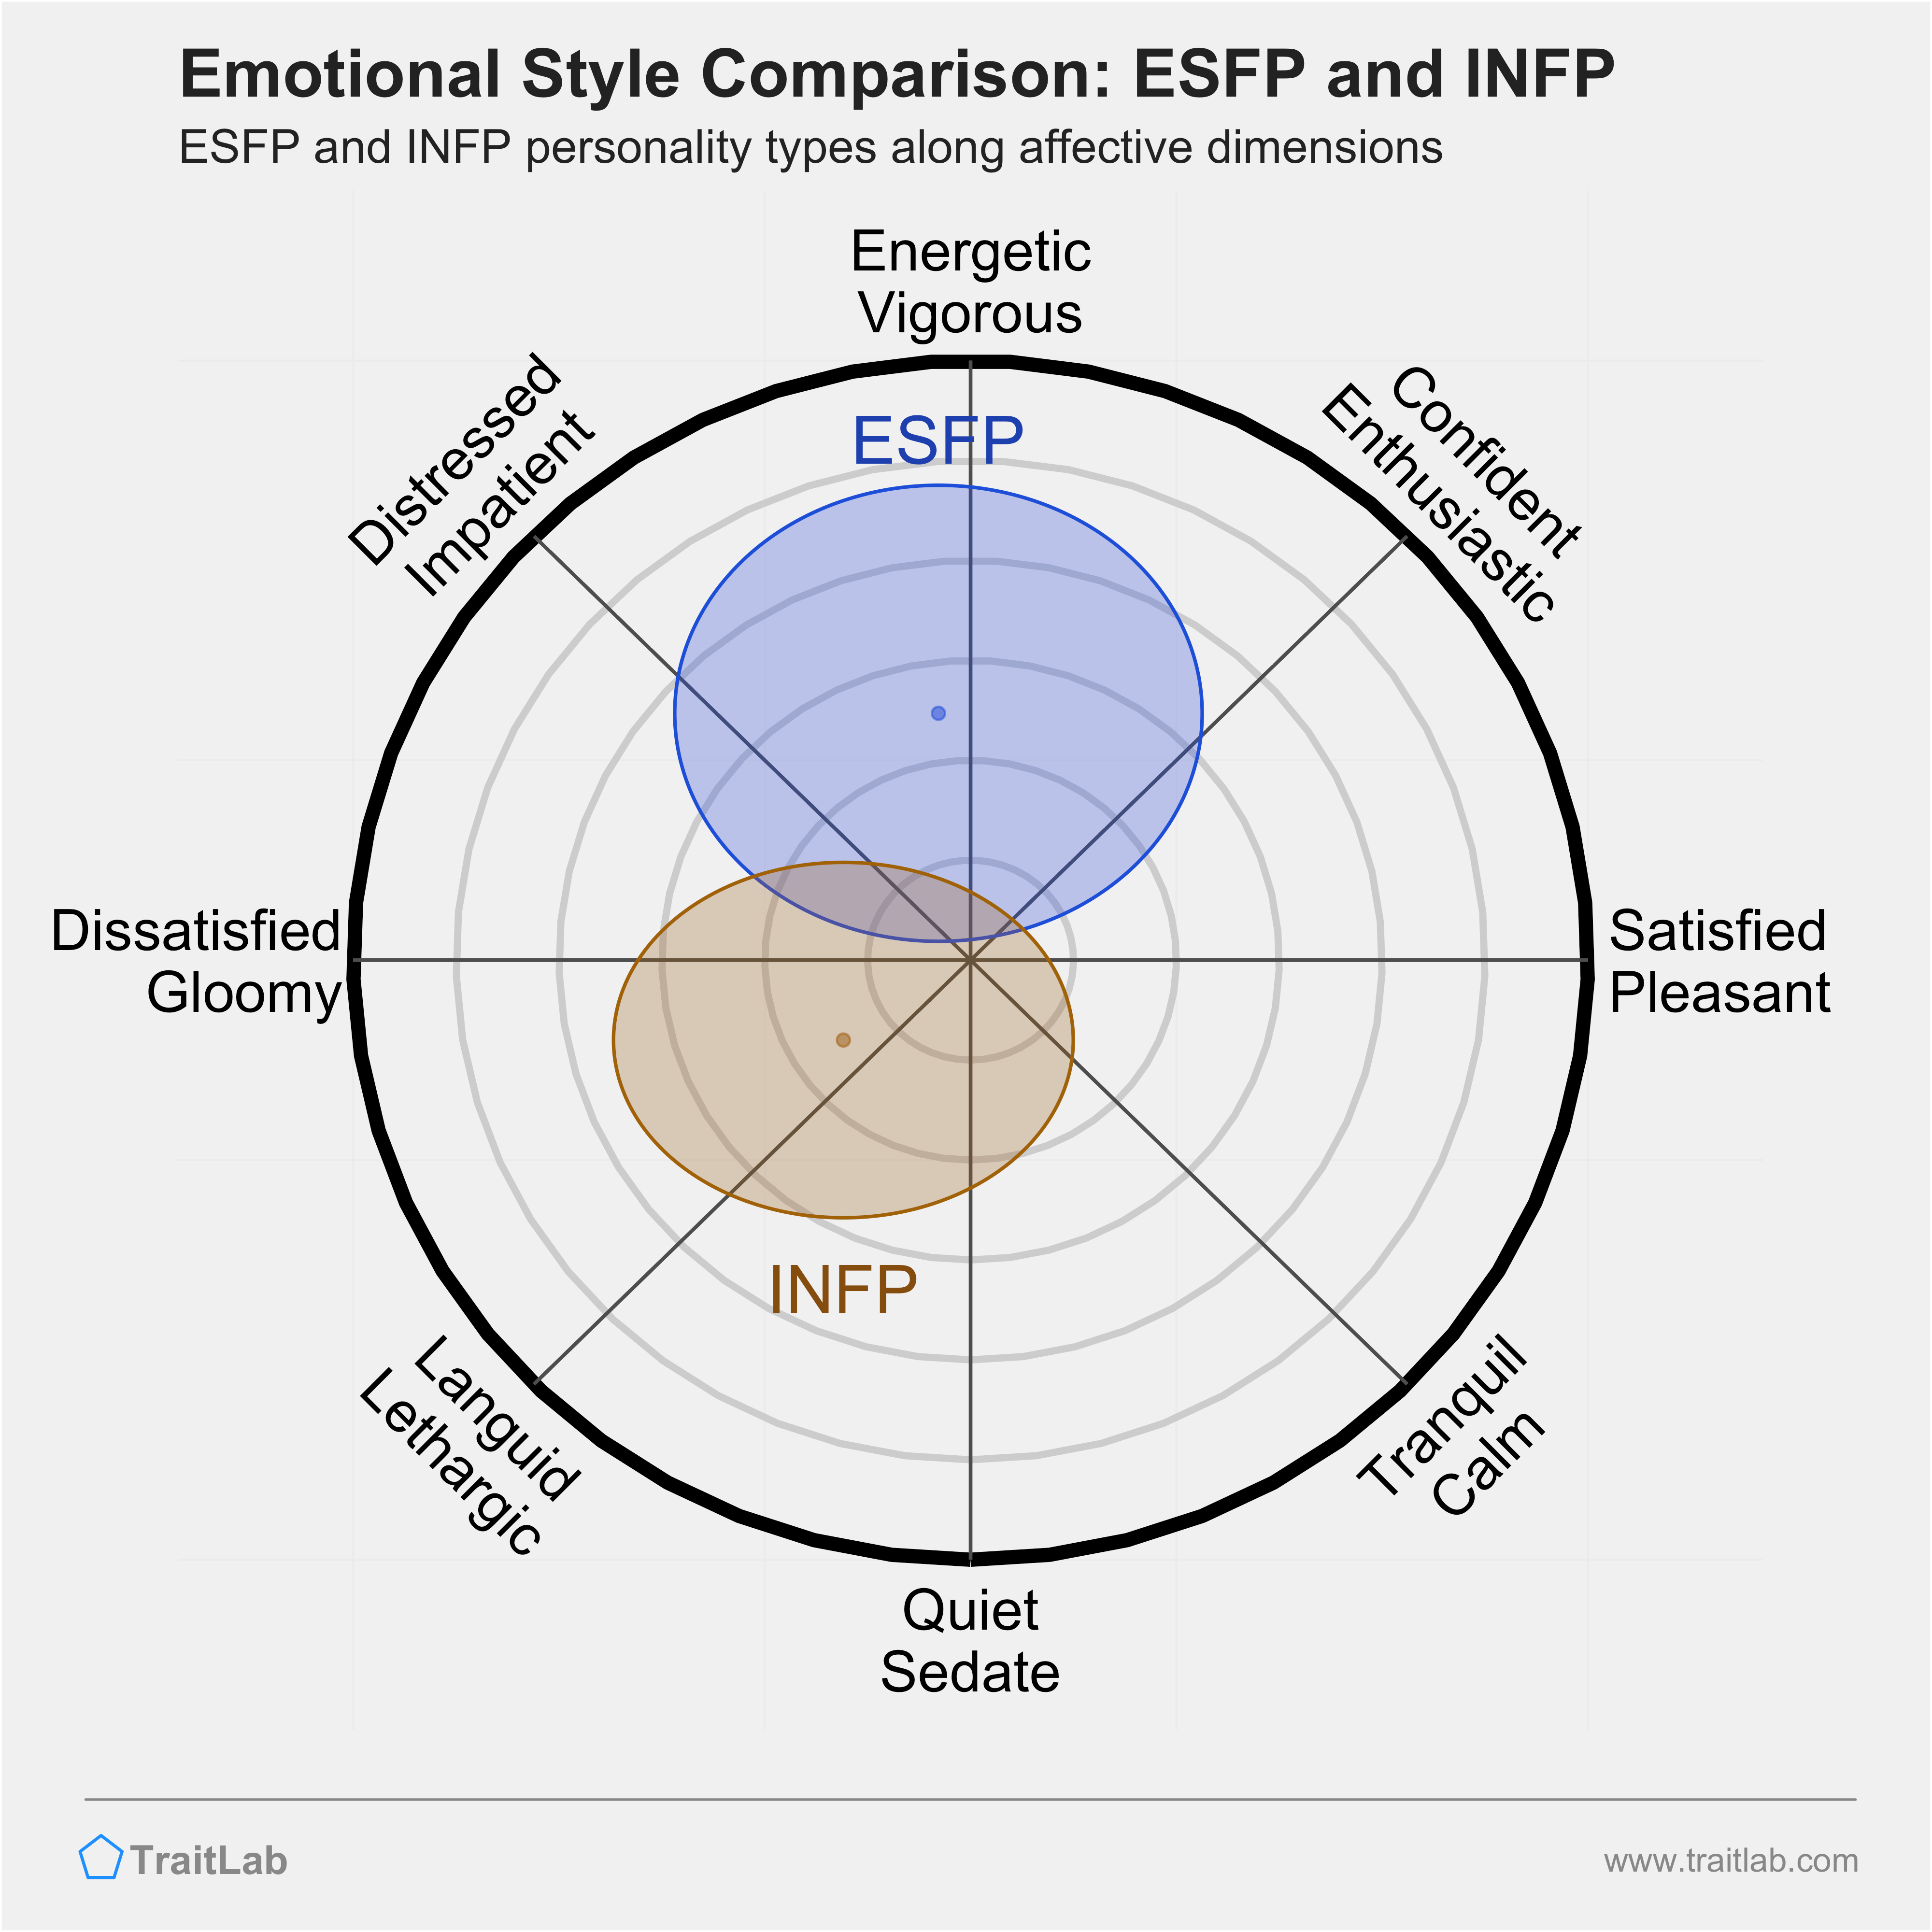 ESFP and INFP comparison across emotional (affective) dimensions